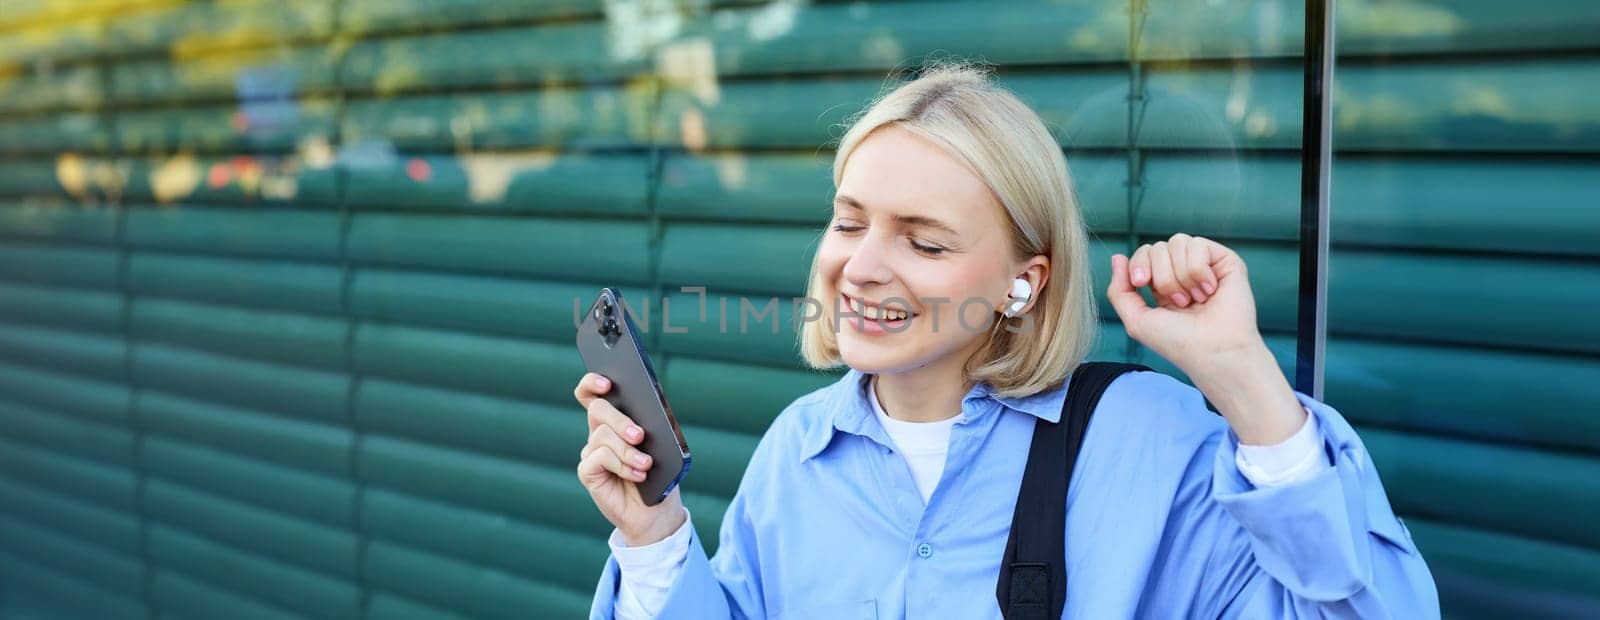 Close up portrait of blond smiling woman, wearing shirt, holding backpack and mobile phone, dancing and listening to music in wireless headphones, closes eyes and raises hand up.